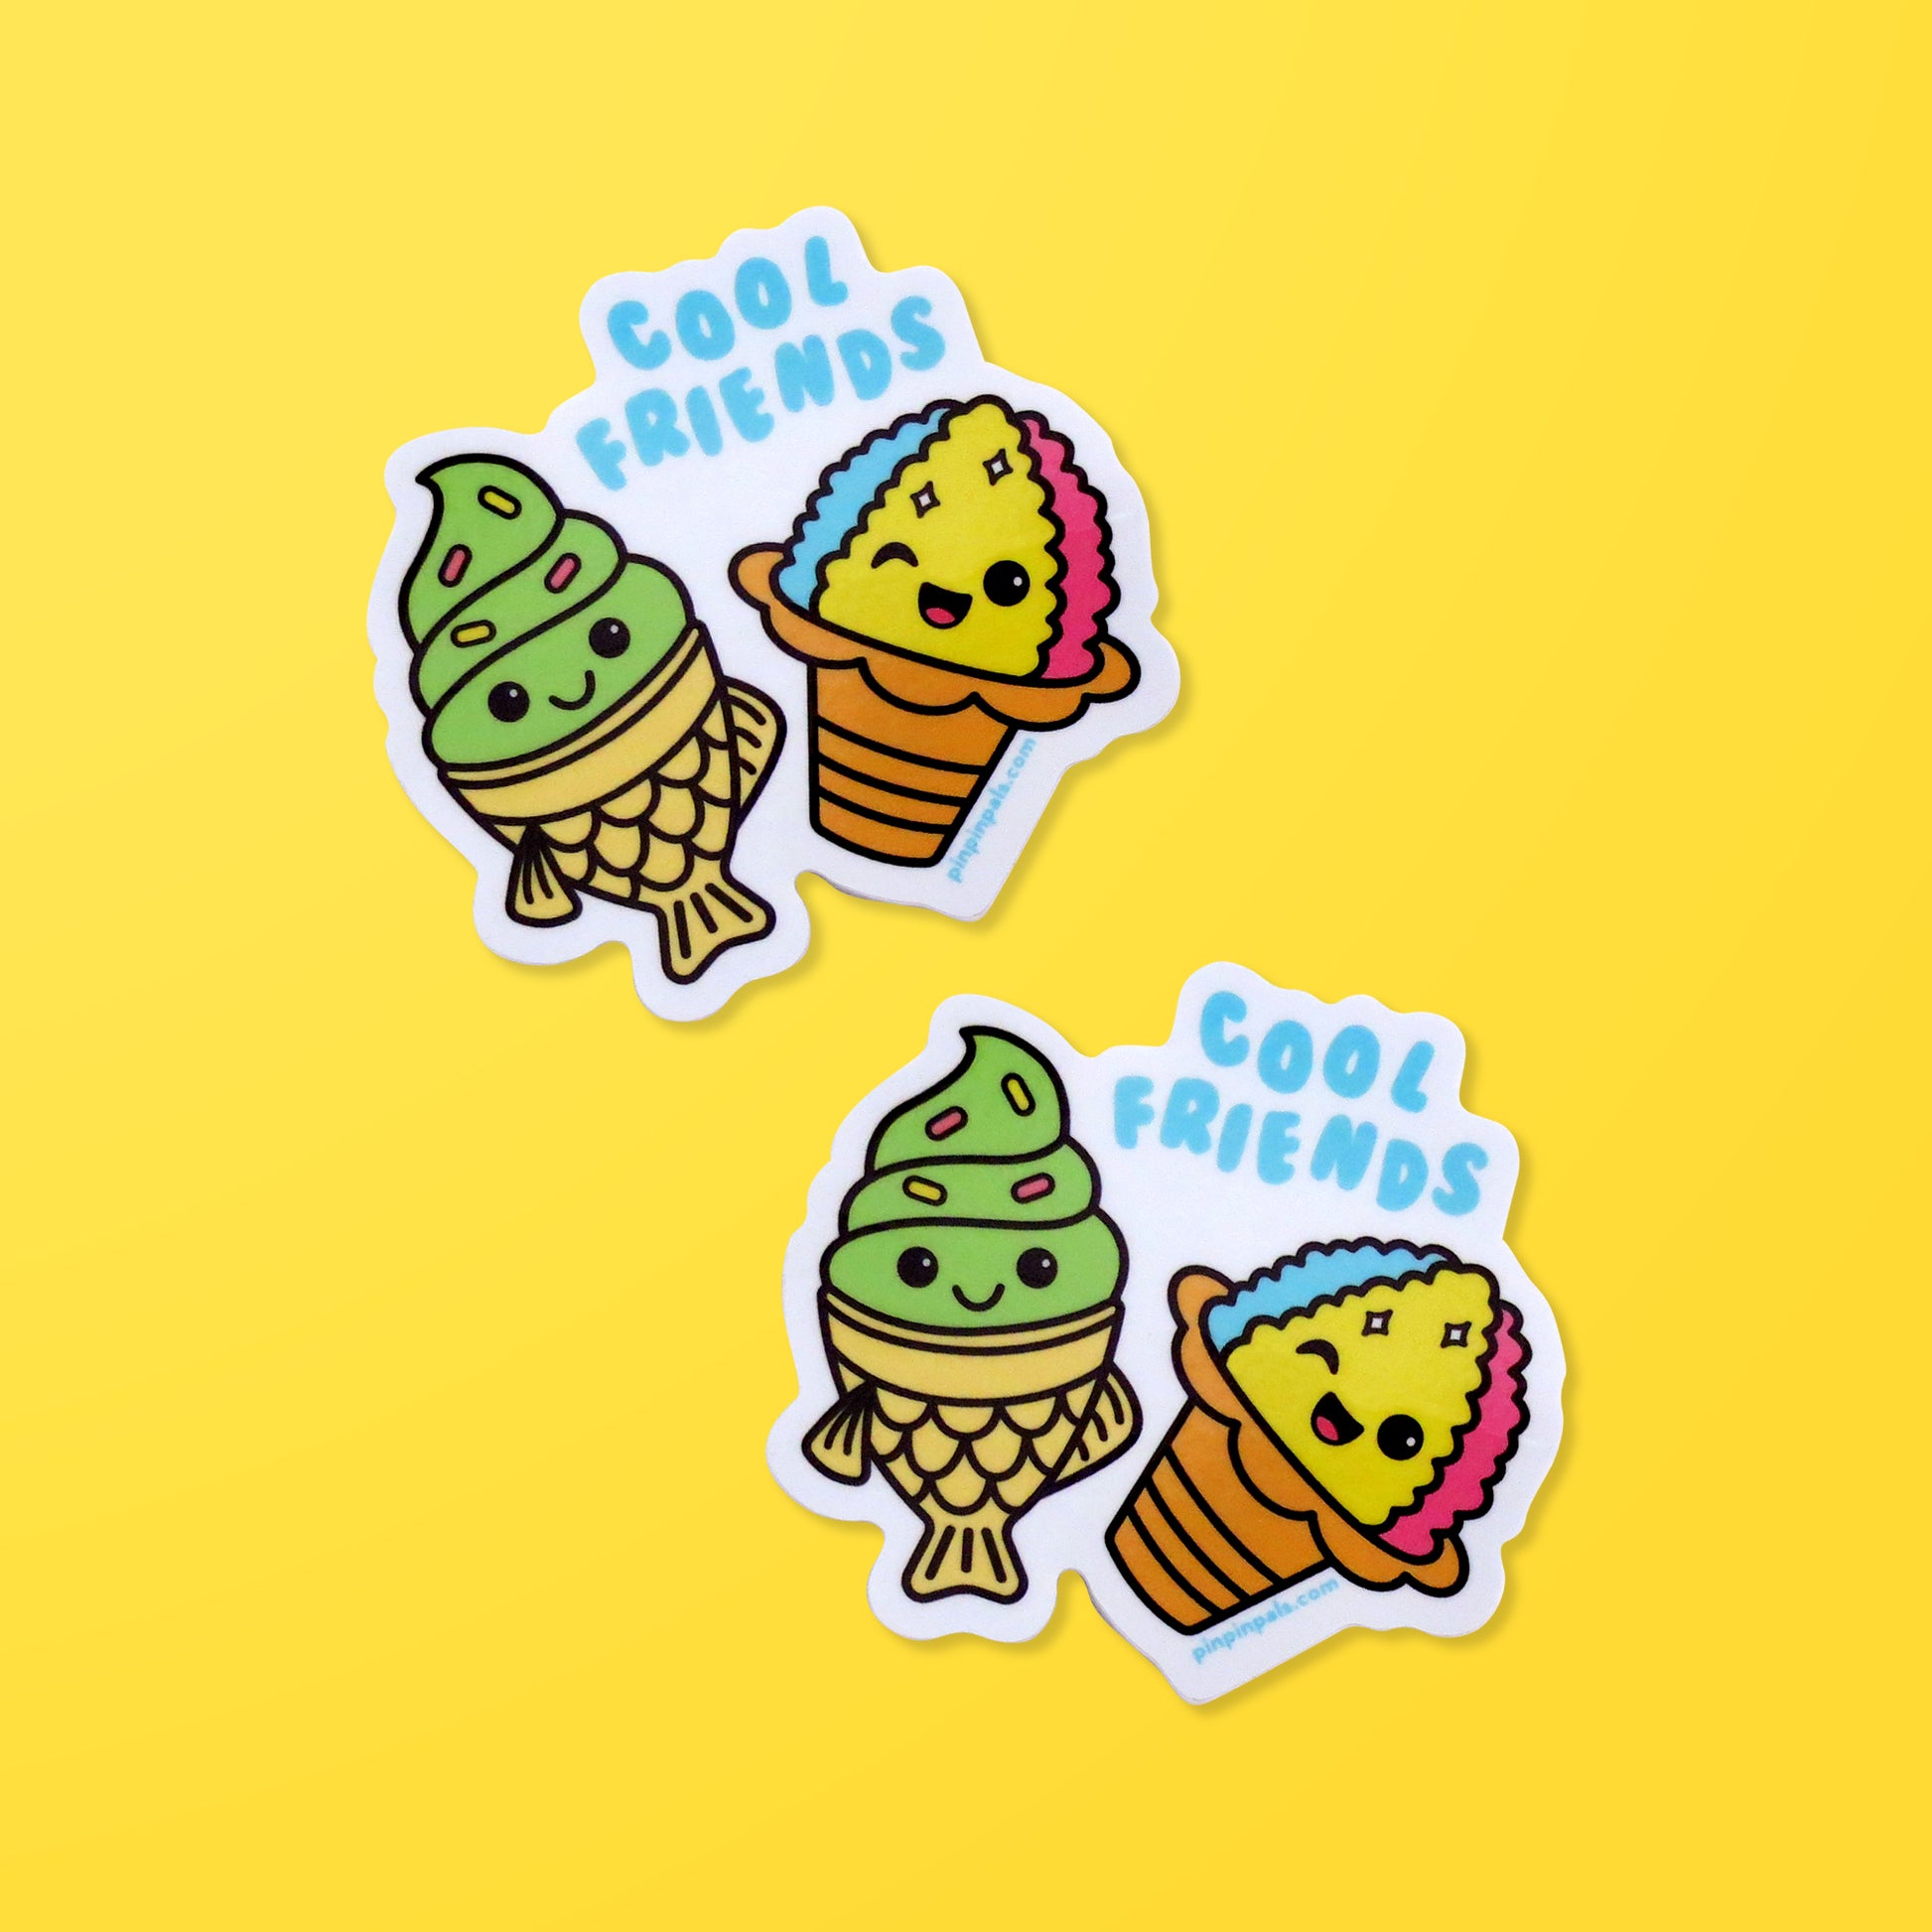 Two Cool Friends - Taiyaki and Shaved Ice vinyl stickers on yellow background